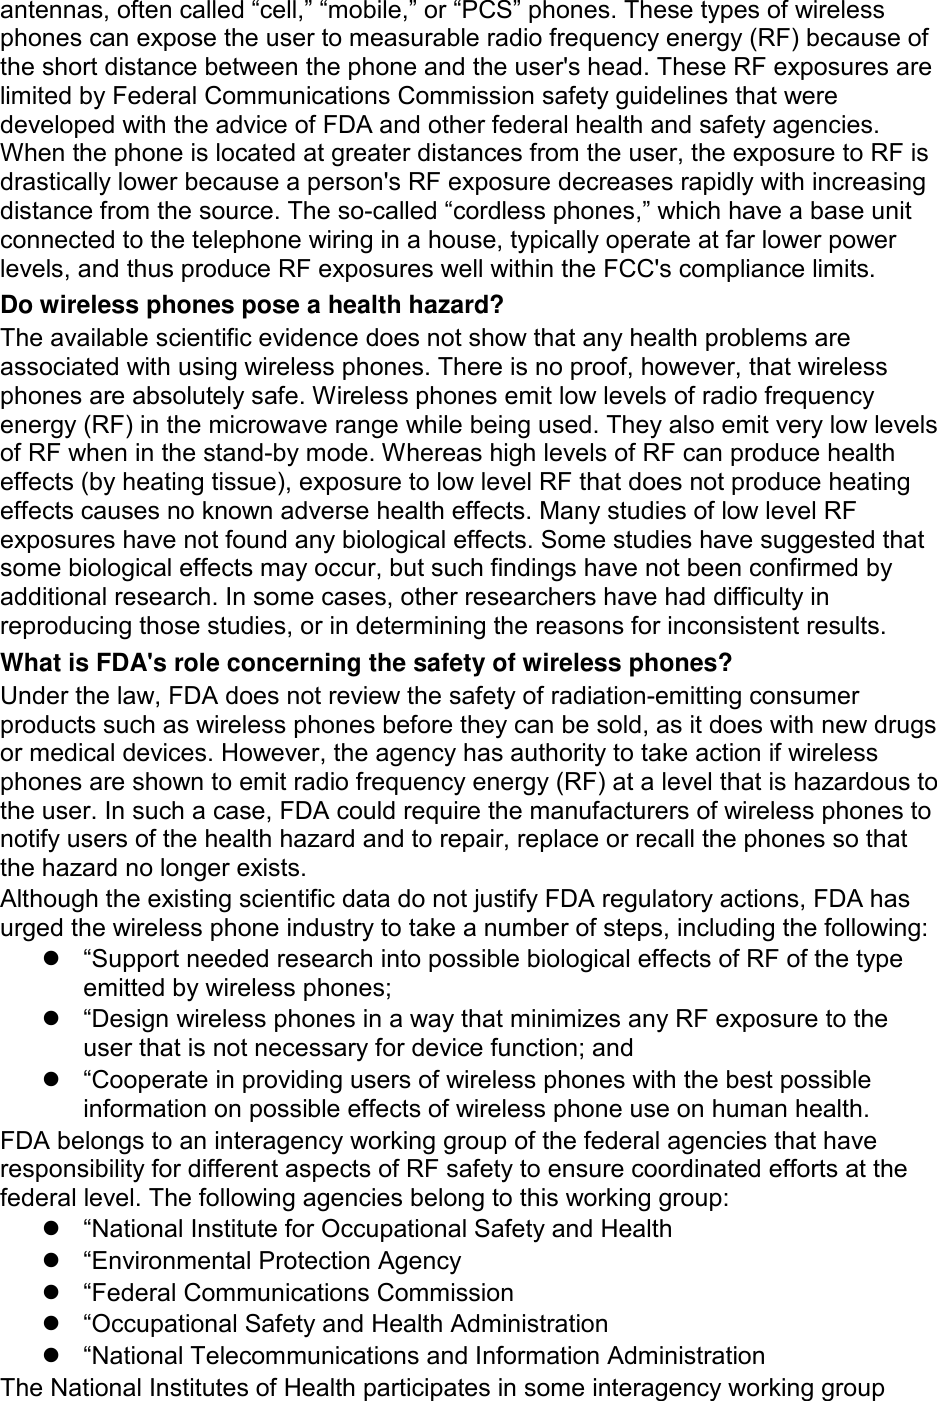 antennas, often called “cell,” “mobile,” or “PCS” phones. These types of wireless phones can expose the user to measurable radio frequency energy (RF) because of the short distance between the phone and the user&apos;s head. These RF exposures are limited by Federal Communications Commission safety guidelines that were developed with the advice of FDA and other federal health and safety agencies. When the phone is located at greater distances from the user, the exposure to RF is drastically lower because a person&apos;s RF exposure decreases rapidly with increasing distance from the source. The so-called “cordless phones,” which have a base unit connected to the telephone wiring in a house, typically operate at far lower power levels, and thus produce RF exposures well within the FCC&apos;s compliance limits. Do wireless phones pose a health hazard? The available scientific evidence does not show that any health problems are associated with using wireless phones. There is no proof, however, that wireless phones are absolutely safe. Wireless phones emit low levels of radio frequency energy (RF) in the microwave range while being used. They also emit very low levels of RF when in the stand-by mode. Whereas high levels of RF can produce health effects (by heating tissue), exposure to low level RF that does not produce heating effects causes no known adverse health effects. Many studies of low level RF exposures have not found any biological effects. Some studies have suggested that some biological effects may occur, but such findings have not been confirmed by additional research. In some cases, other researchers have had difficulty in reproducing those studies, or in determining the reasons for inconsistent results. What is FDA&apos;s role concerning the safety of wireless phones? Under the law, FDA does not review the safety of radiation-emitting consumer products such as wireless phones before they can be sold, as it does with new drugs or medical devices. However, the agency has authority to take action if wireless phones are shown to emit radio frequency energy (RF) at a level that is hazardous to the user. In such a case, FDA could require the manufacturers of wireless phones to notify users of the health hazard and to repair, replace or recall the phones so that the hazard no longer exists. Although the existing scientific data do not justify FDA regulatory actions, FDA has urged the wireless phone industry to take a number of steps, including the following: “Support needed research into possible biological effects of RF of the typeemitted by wireless phones;“Design wireless phones in a way that minimizes any RF exposure to theuser that is not necessary for device function; and“Cooperate in providing users of wireless phones with the best possibleinformation on possible effects of wireless phone use on human health.FDA belongs to an interagency working group of the federal agencies that have responsibility for different aspects of RF safety to ensure coordinated efforts at the federal level. The following agencies belong to this working group: “National Institute for Occupational Safety and Health“Environmental Protection Agency“Federal Communications Commission“Occupational Safety and Health Administration“National Telecommunications and Information AdministrationThe National Institutes of Health participates in some interagency working group 